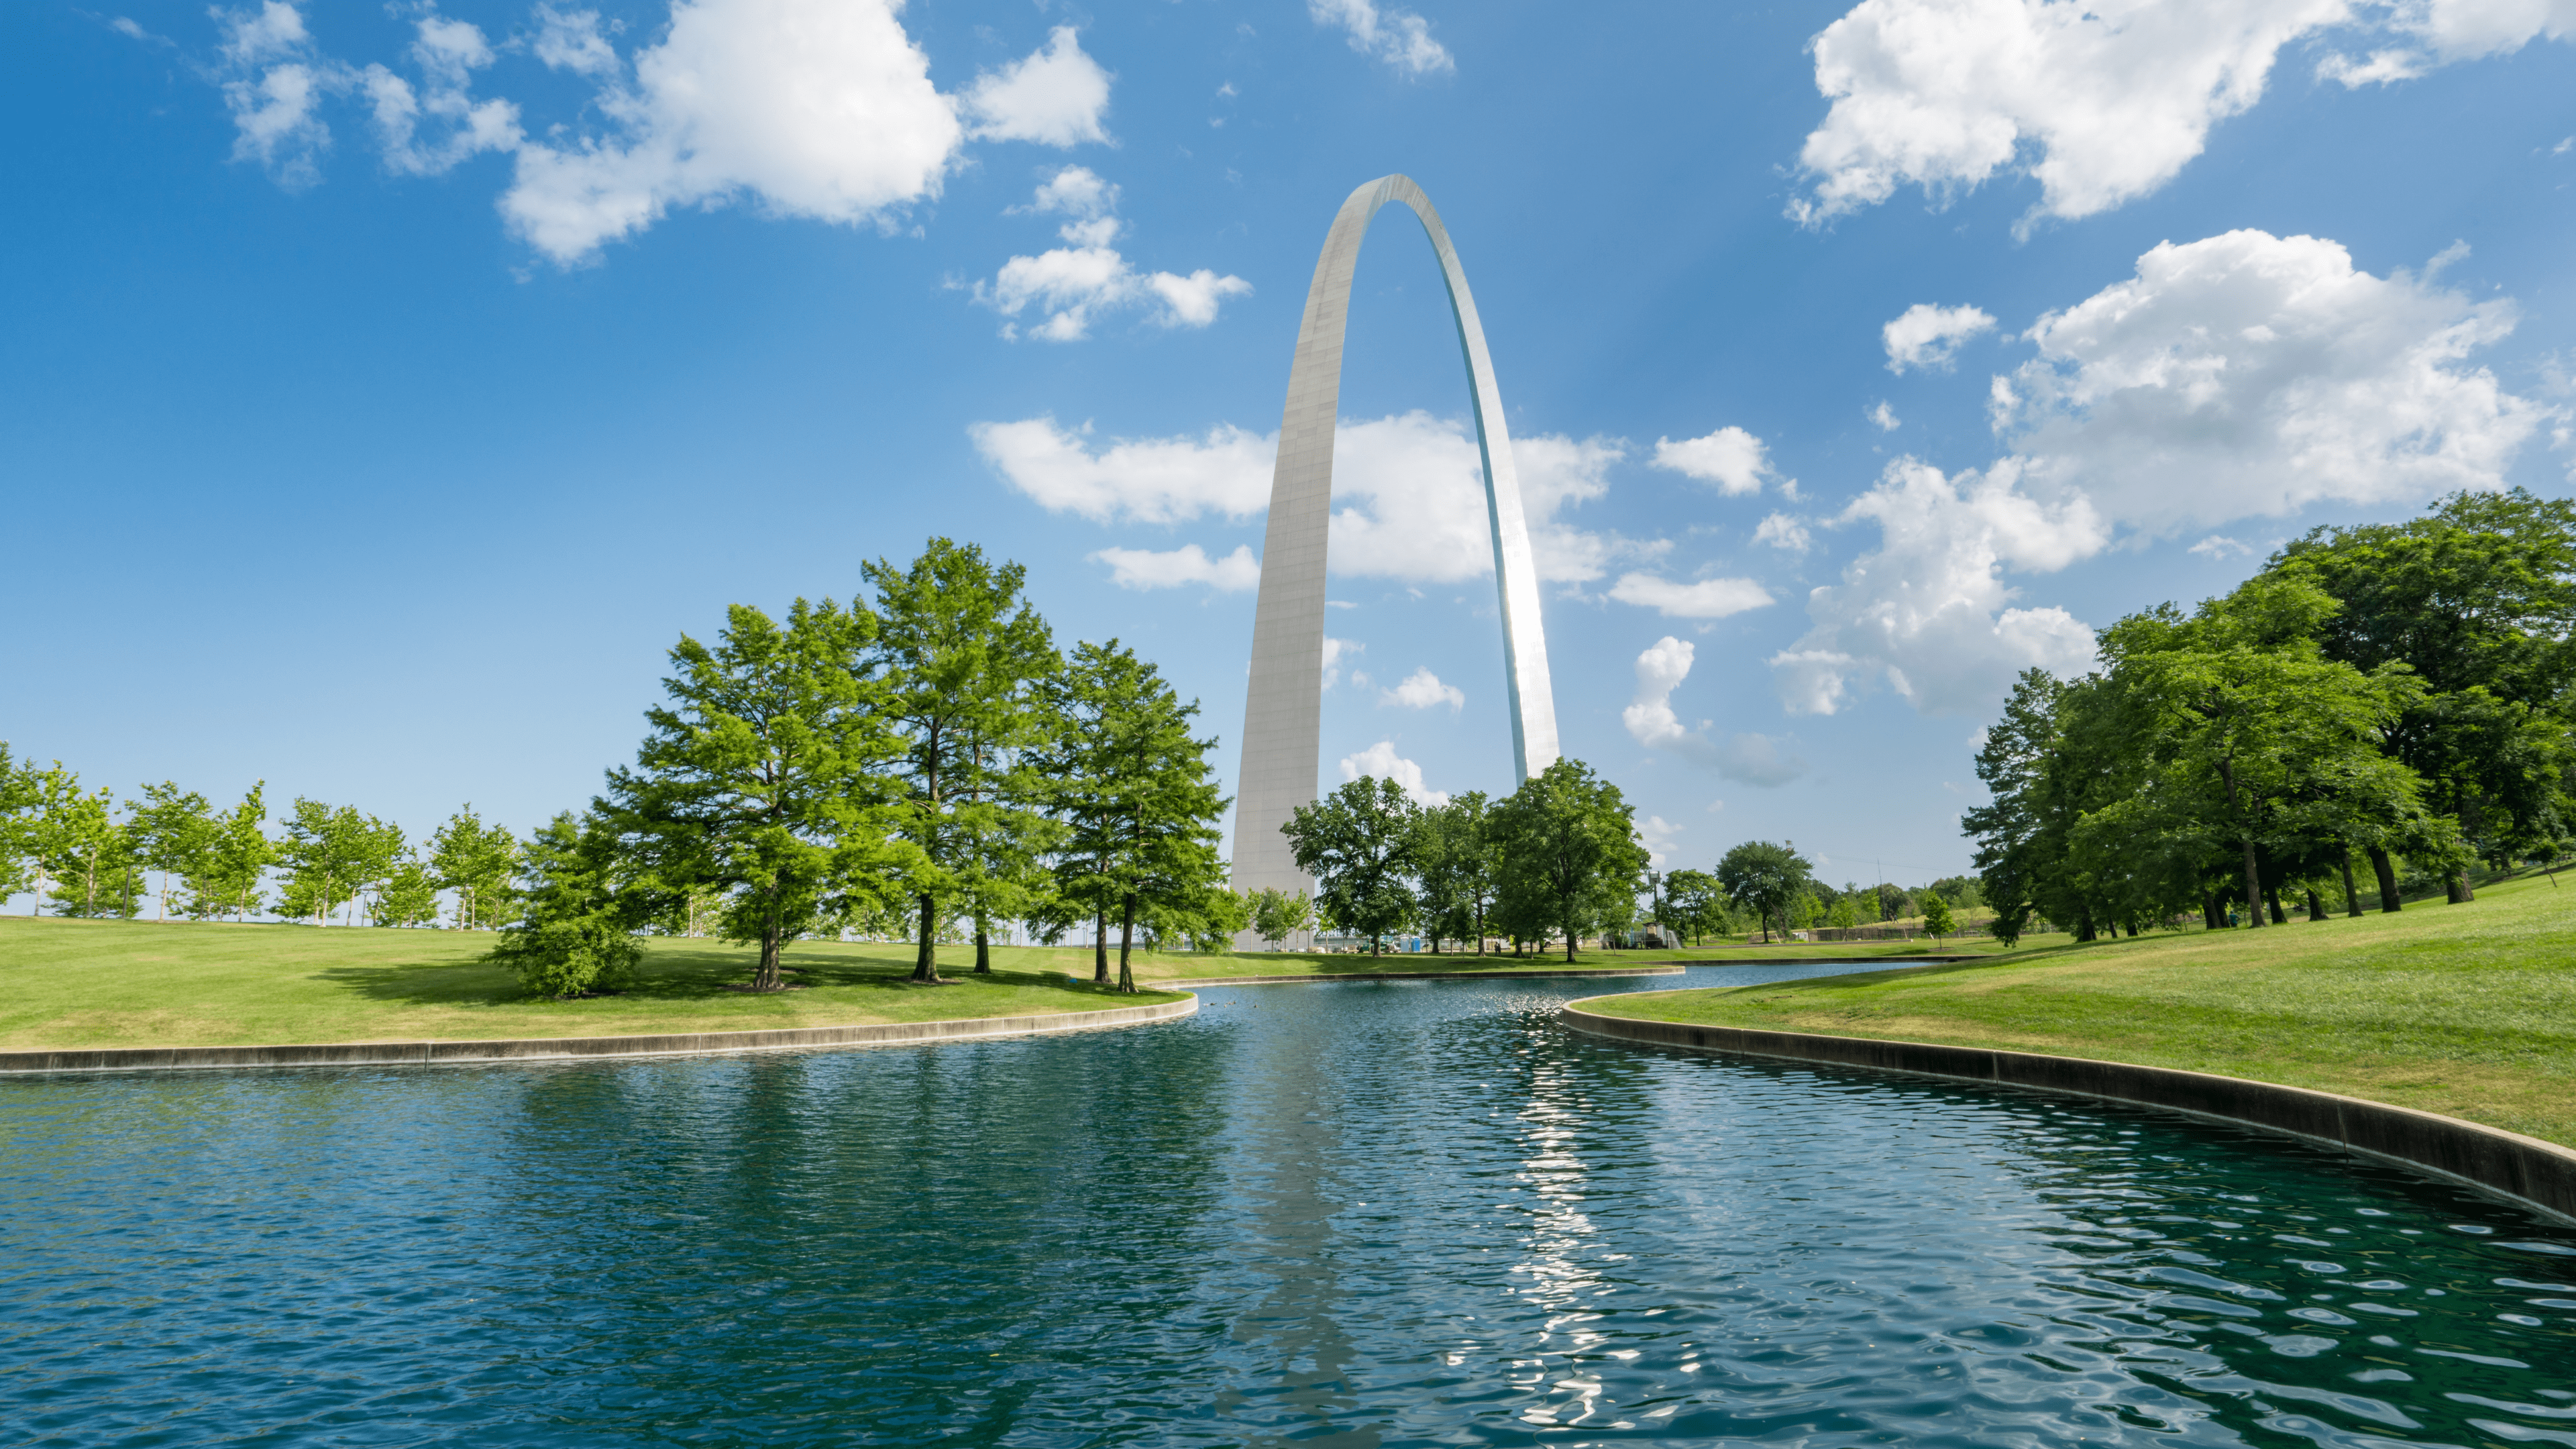 The St Louis Arch with the lake in front and the reflection in the water.